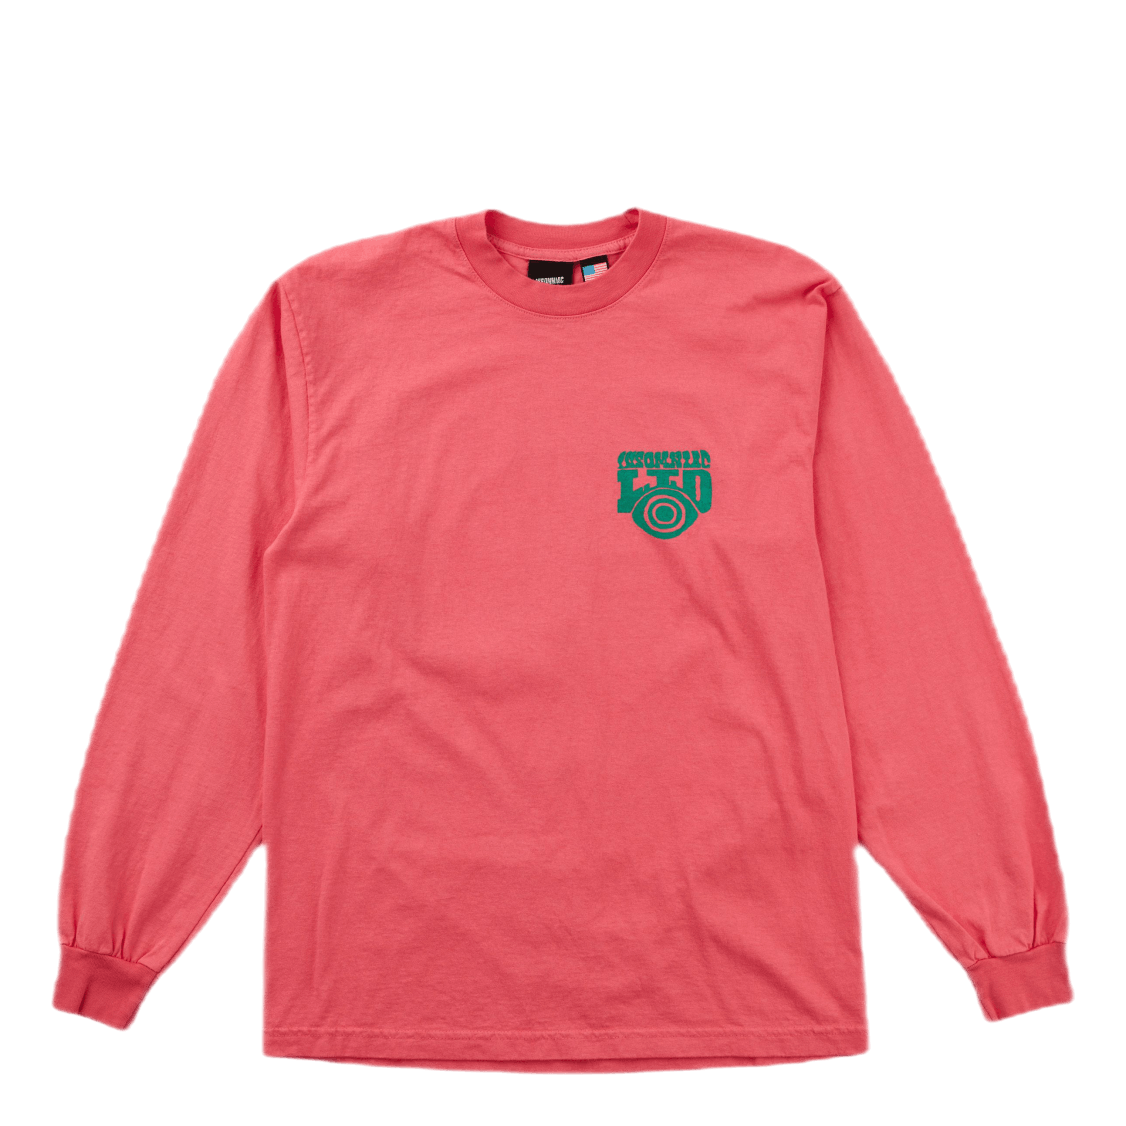 Nrg L/s Tee Pink